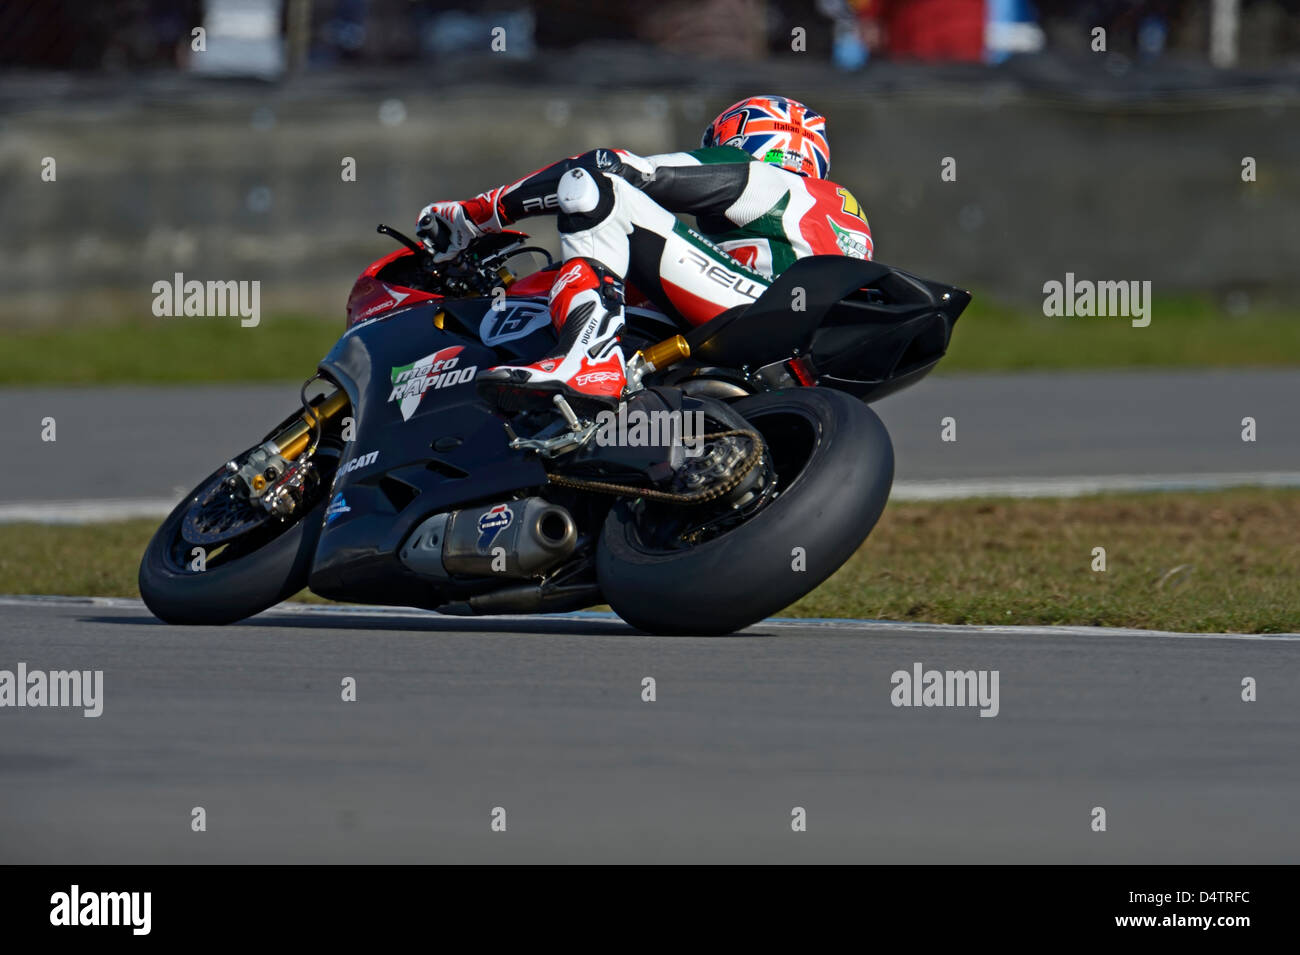 matteo baiocco on the ducati, bsb 2013 Stock Photo